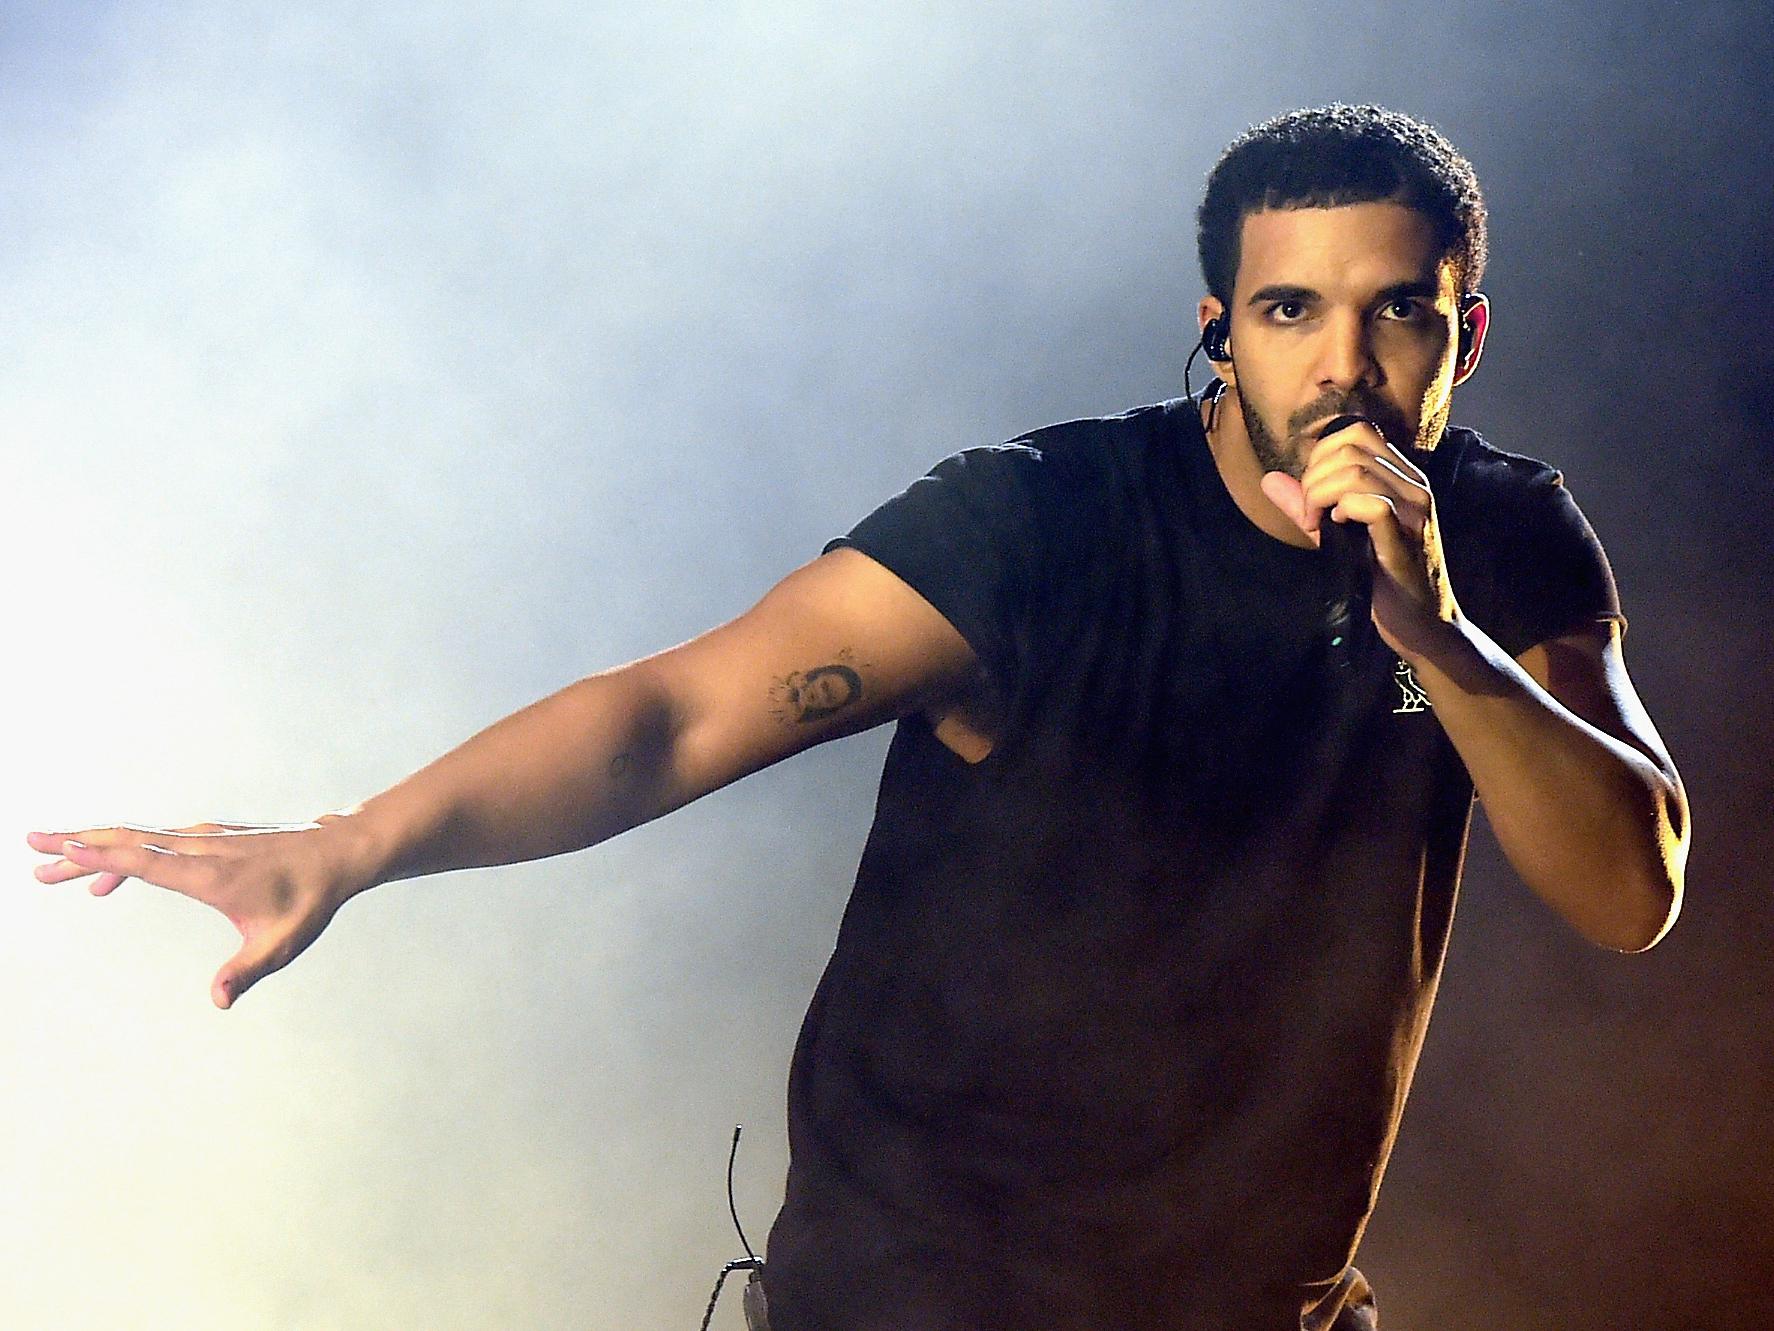 Drake’s One Dance now sits at number five in the UK singles chart